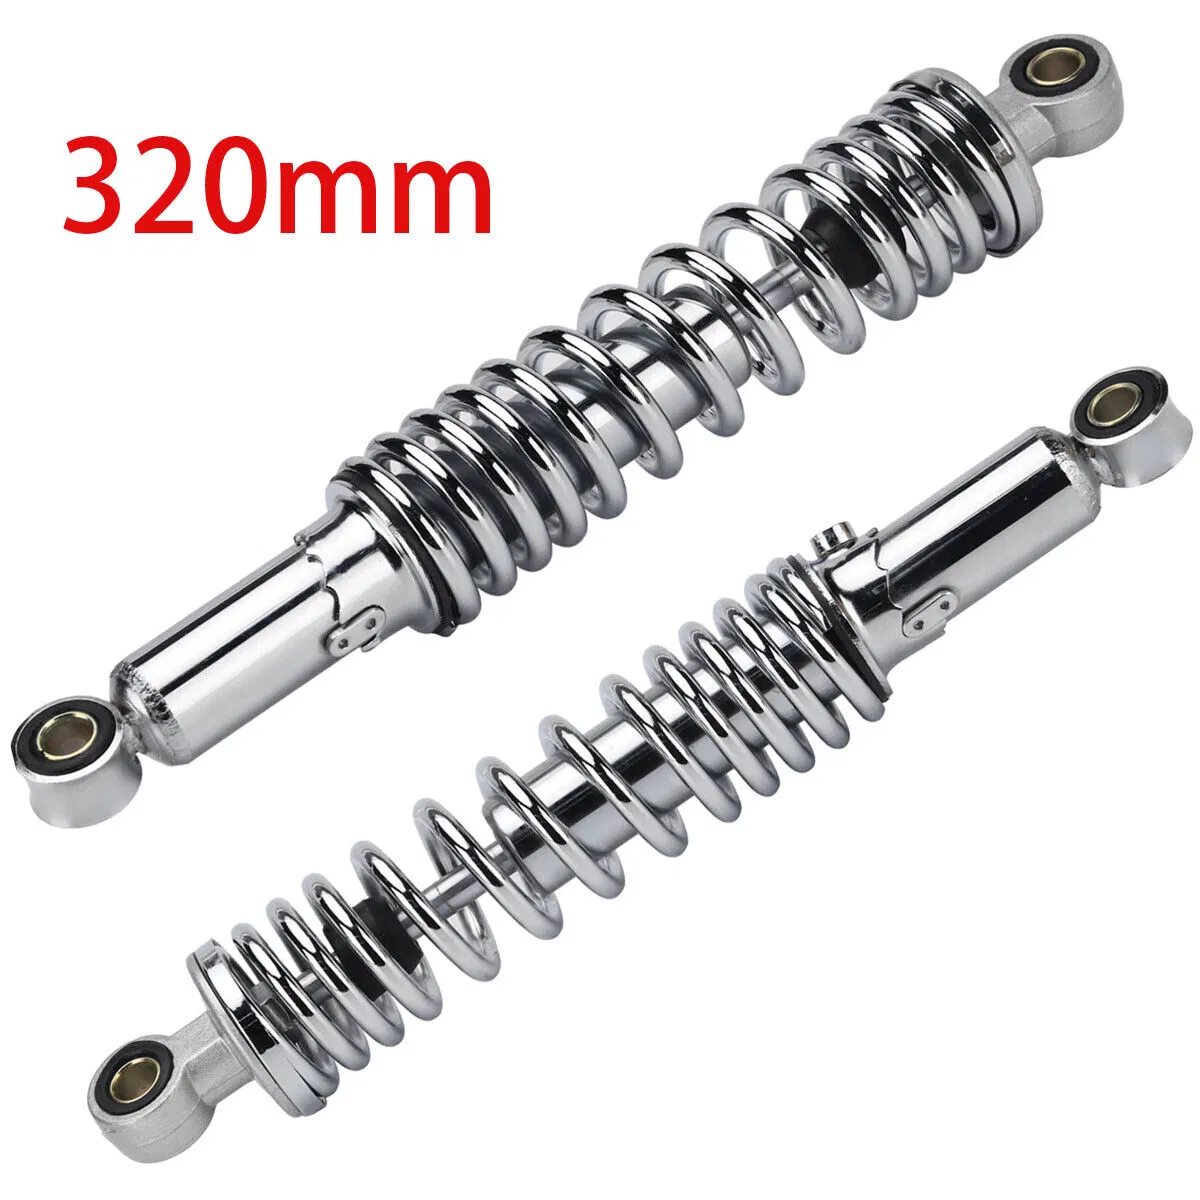 12.5''320mm Chrome Motorcycle Rear Air Shock Absorber Suspension for Honda